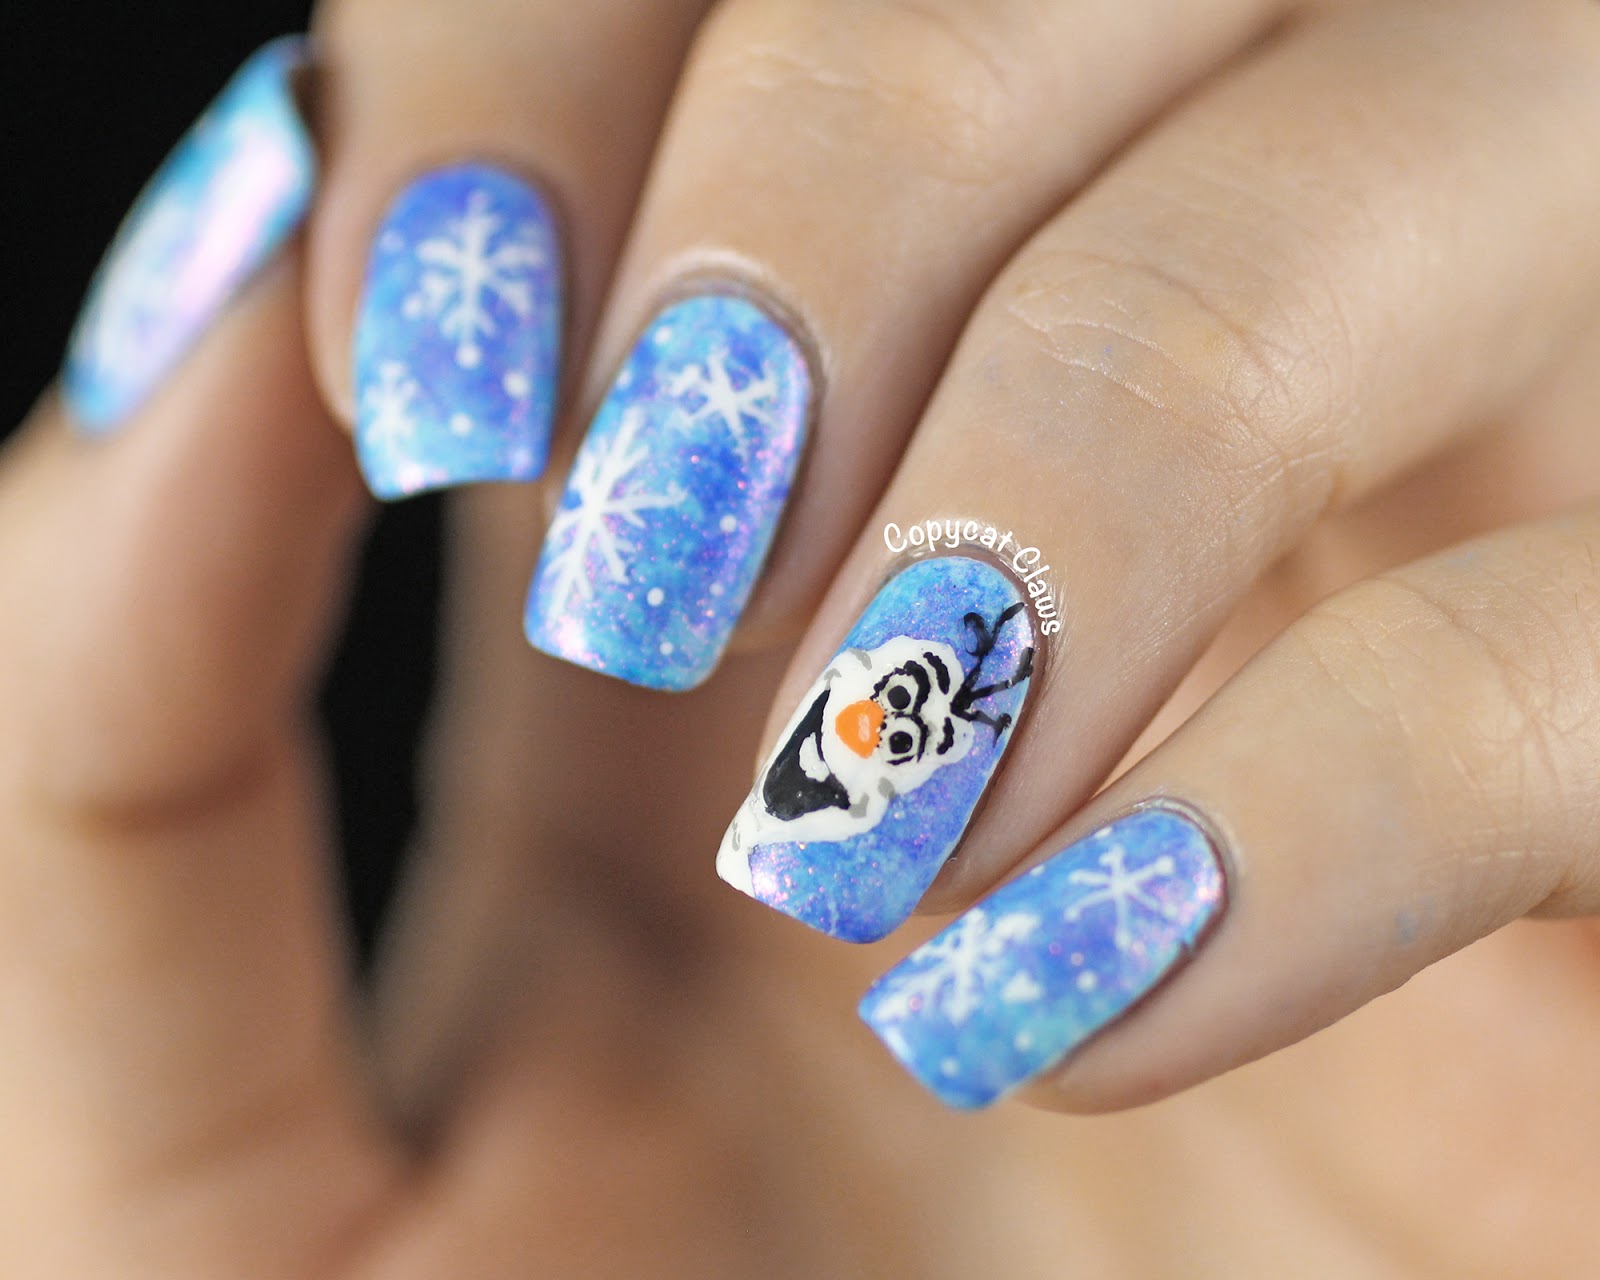 2. Easy Winter Nail Art - wide 4